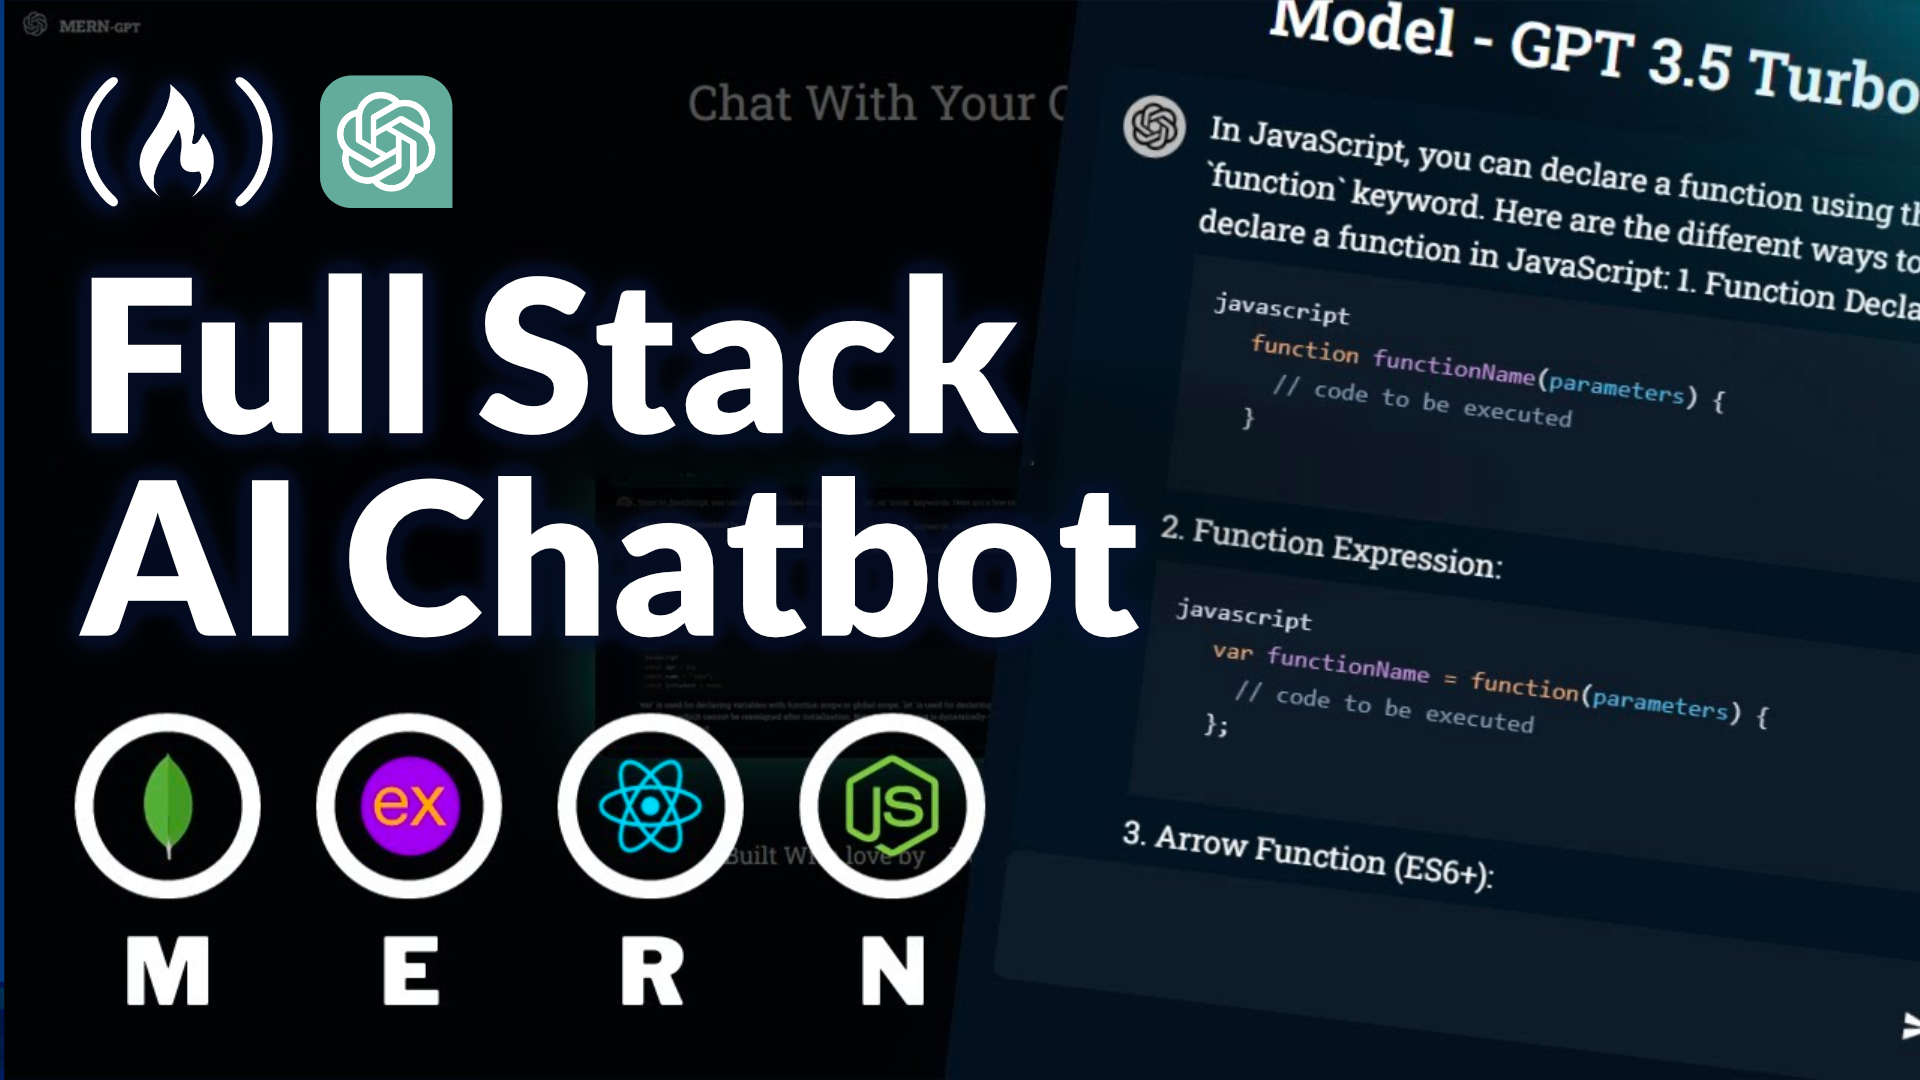 Integrate OpenAI's Chatbot with Discord in 10 simple steps